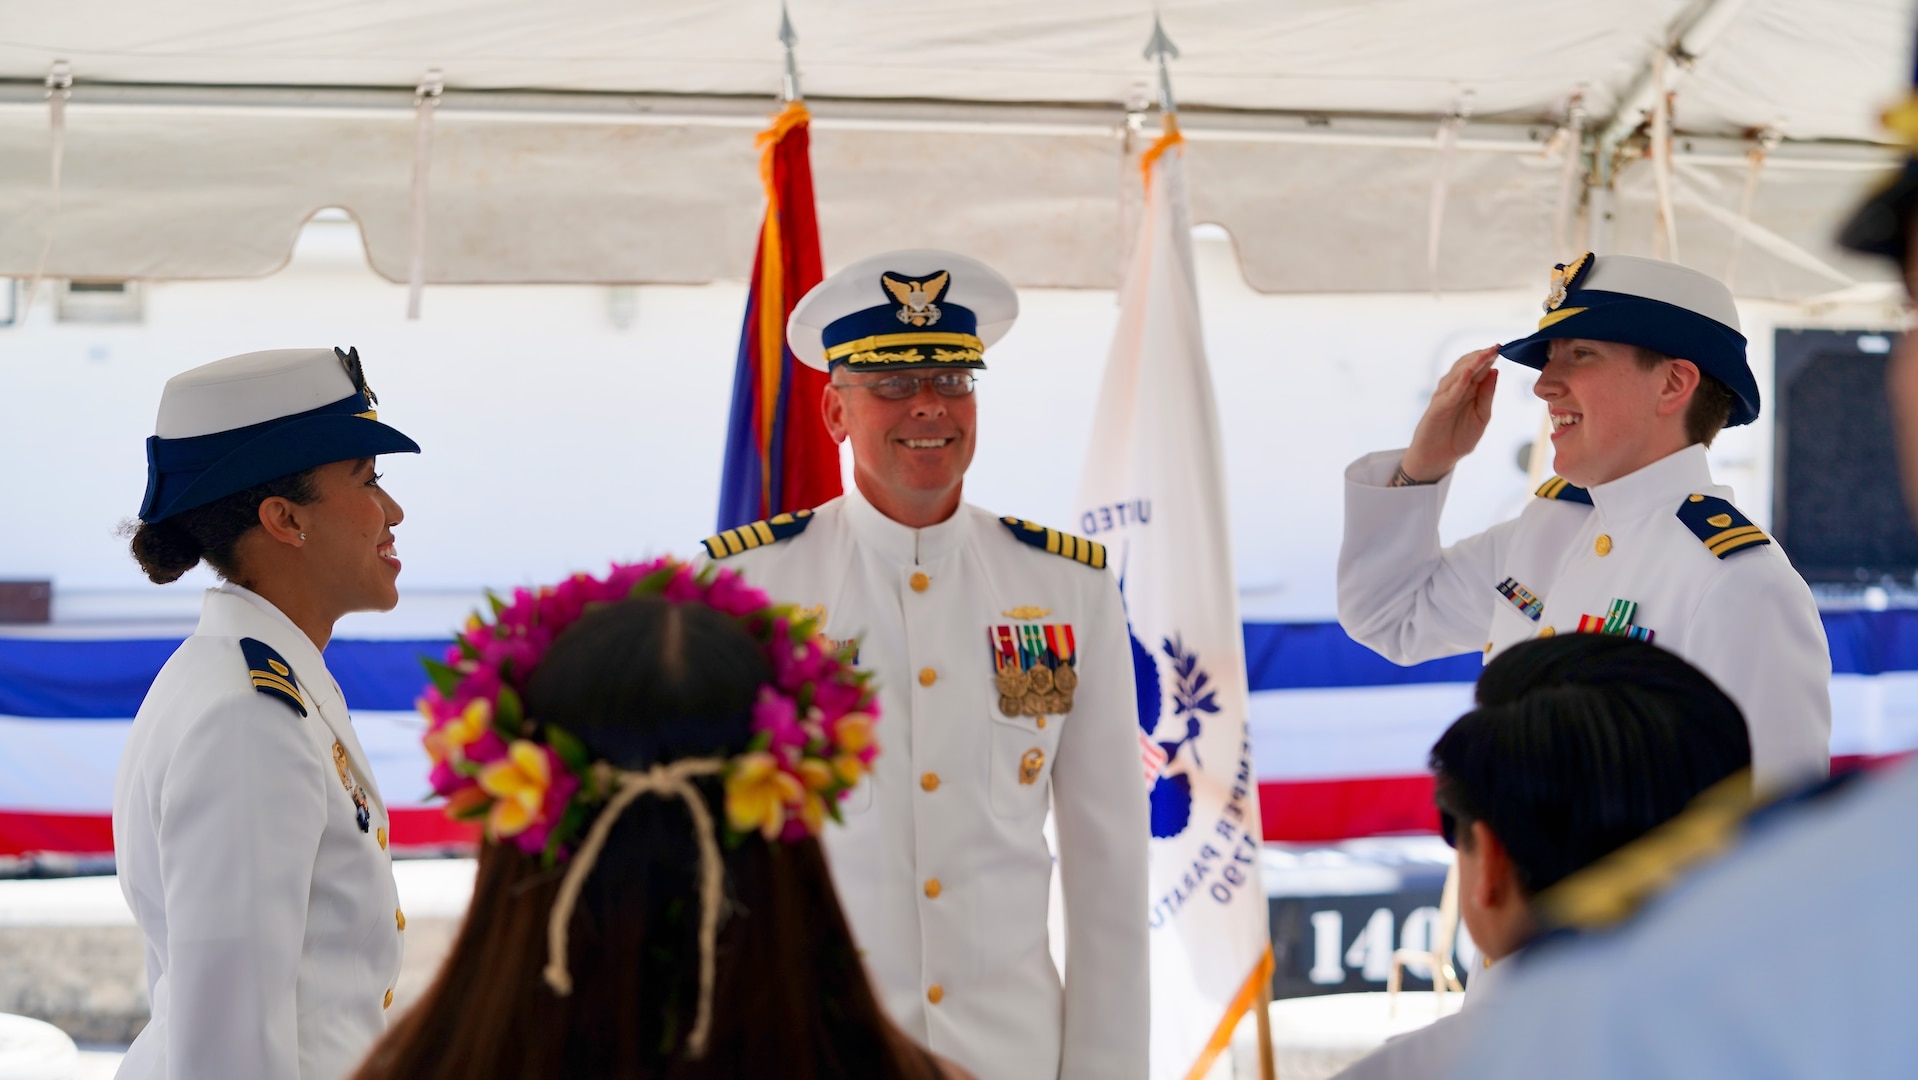 Lt. Emma Saunders takes command of USCGC Myrtle Hazard (WPC 1139) from Lt. Jalle Merritt in a change of command ceremony at Victor Pier in Apra Harbor, Guam, on April 19, 2024. After two years as commanding officer, Merritt leaves Guam to join the vice commandant's staff as military aide. (U.S. Coast Guard photo by Chief Warrant Officer Sara Muir)